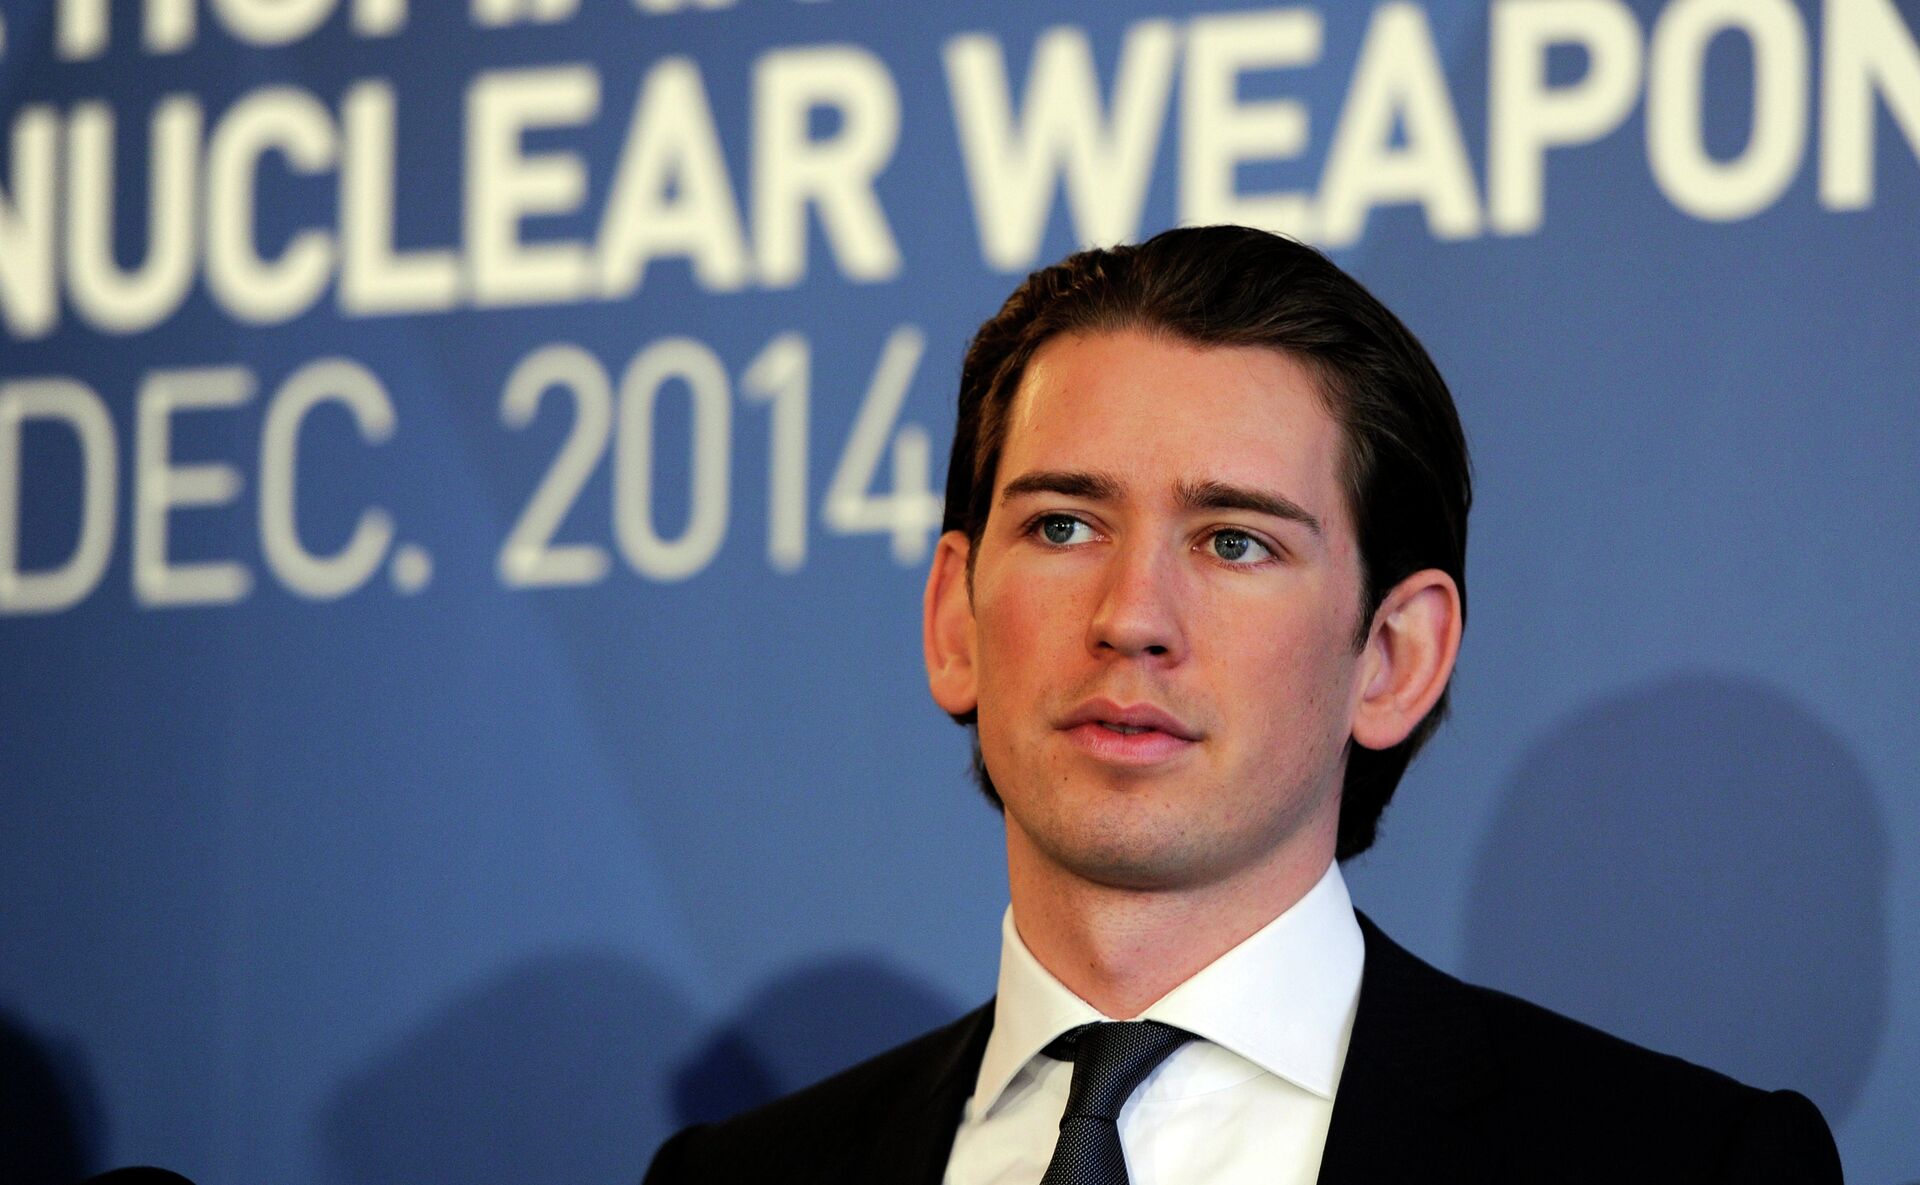 Austria's Minister for Foreign Affairs and Integration Sebastian Kurz speaks at the International conference on the humanitarian impact of nuclear weapons, on December 8, 2014 in Vienna - Sputnik International, 1920, 02.12.2021